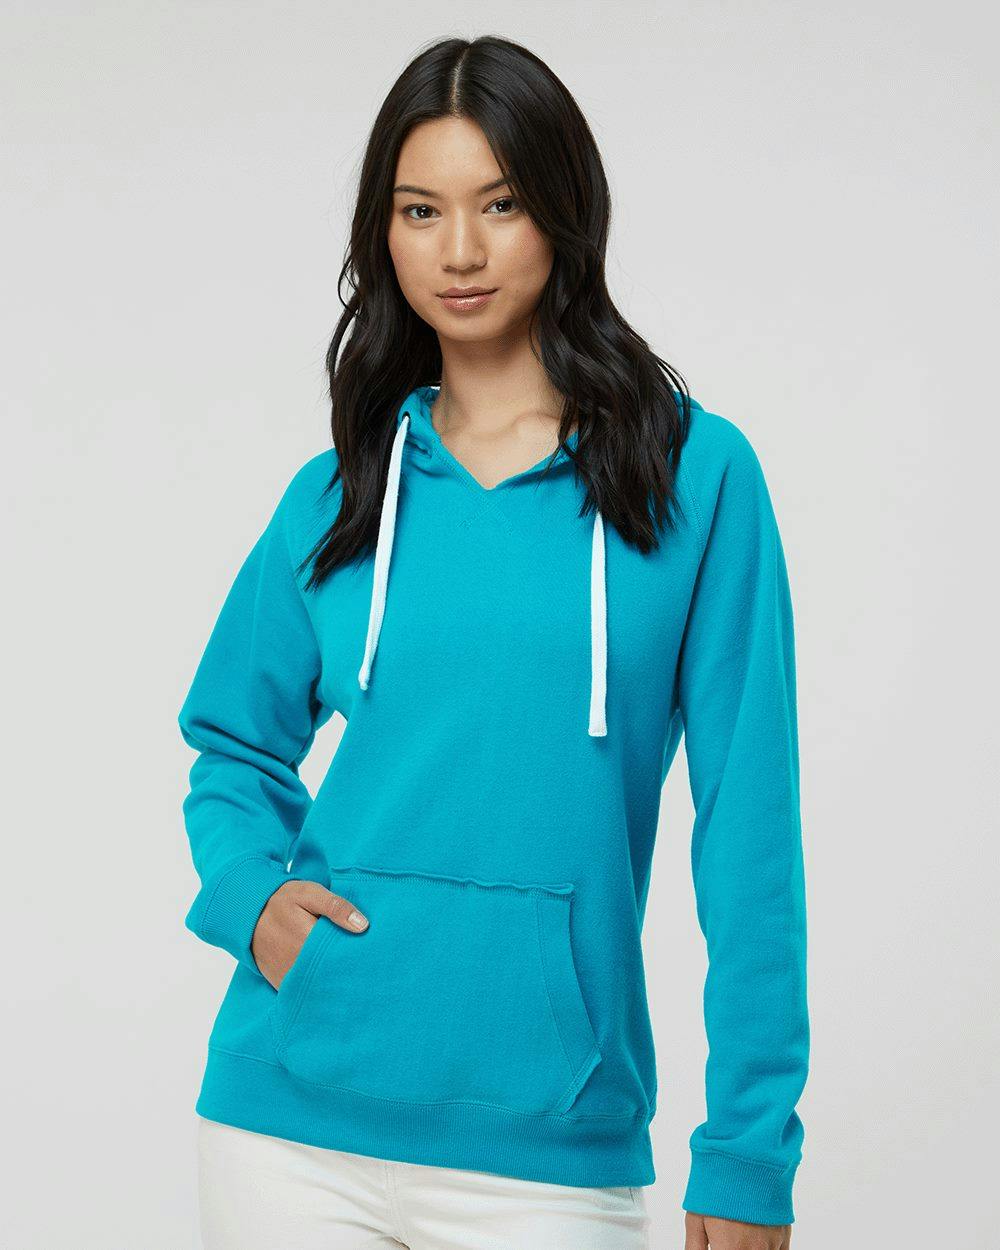 Image for Women's Sueded V-Neck Hooded Sweatshirt - 8836